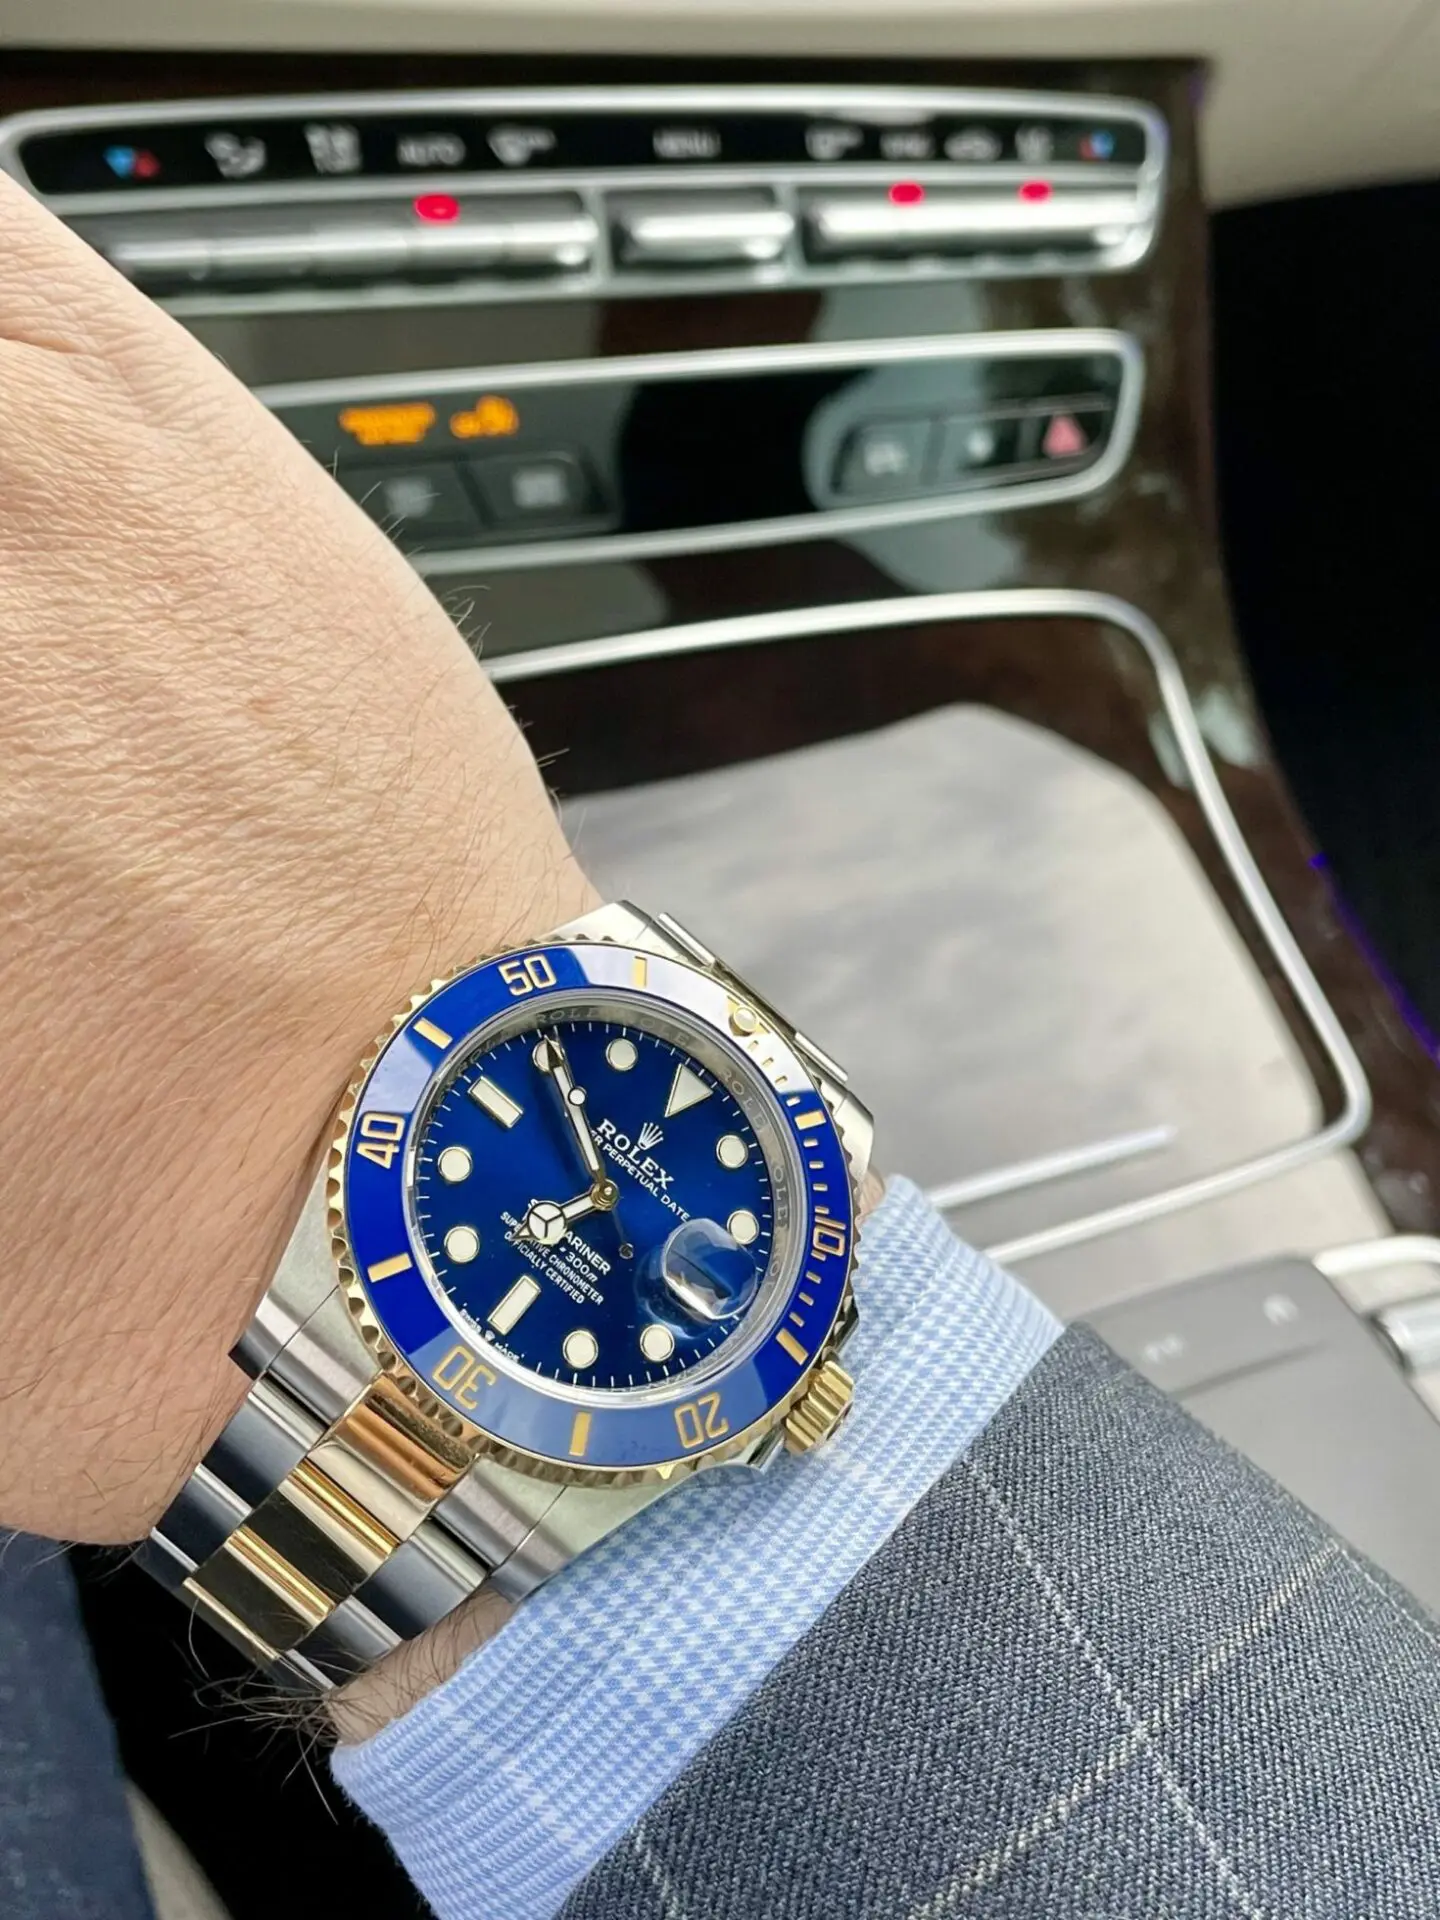 My Wife Won't Let Me Borrow Her Rolex